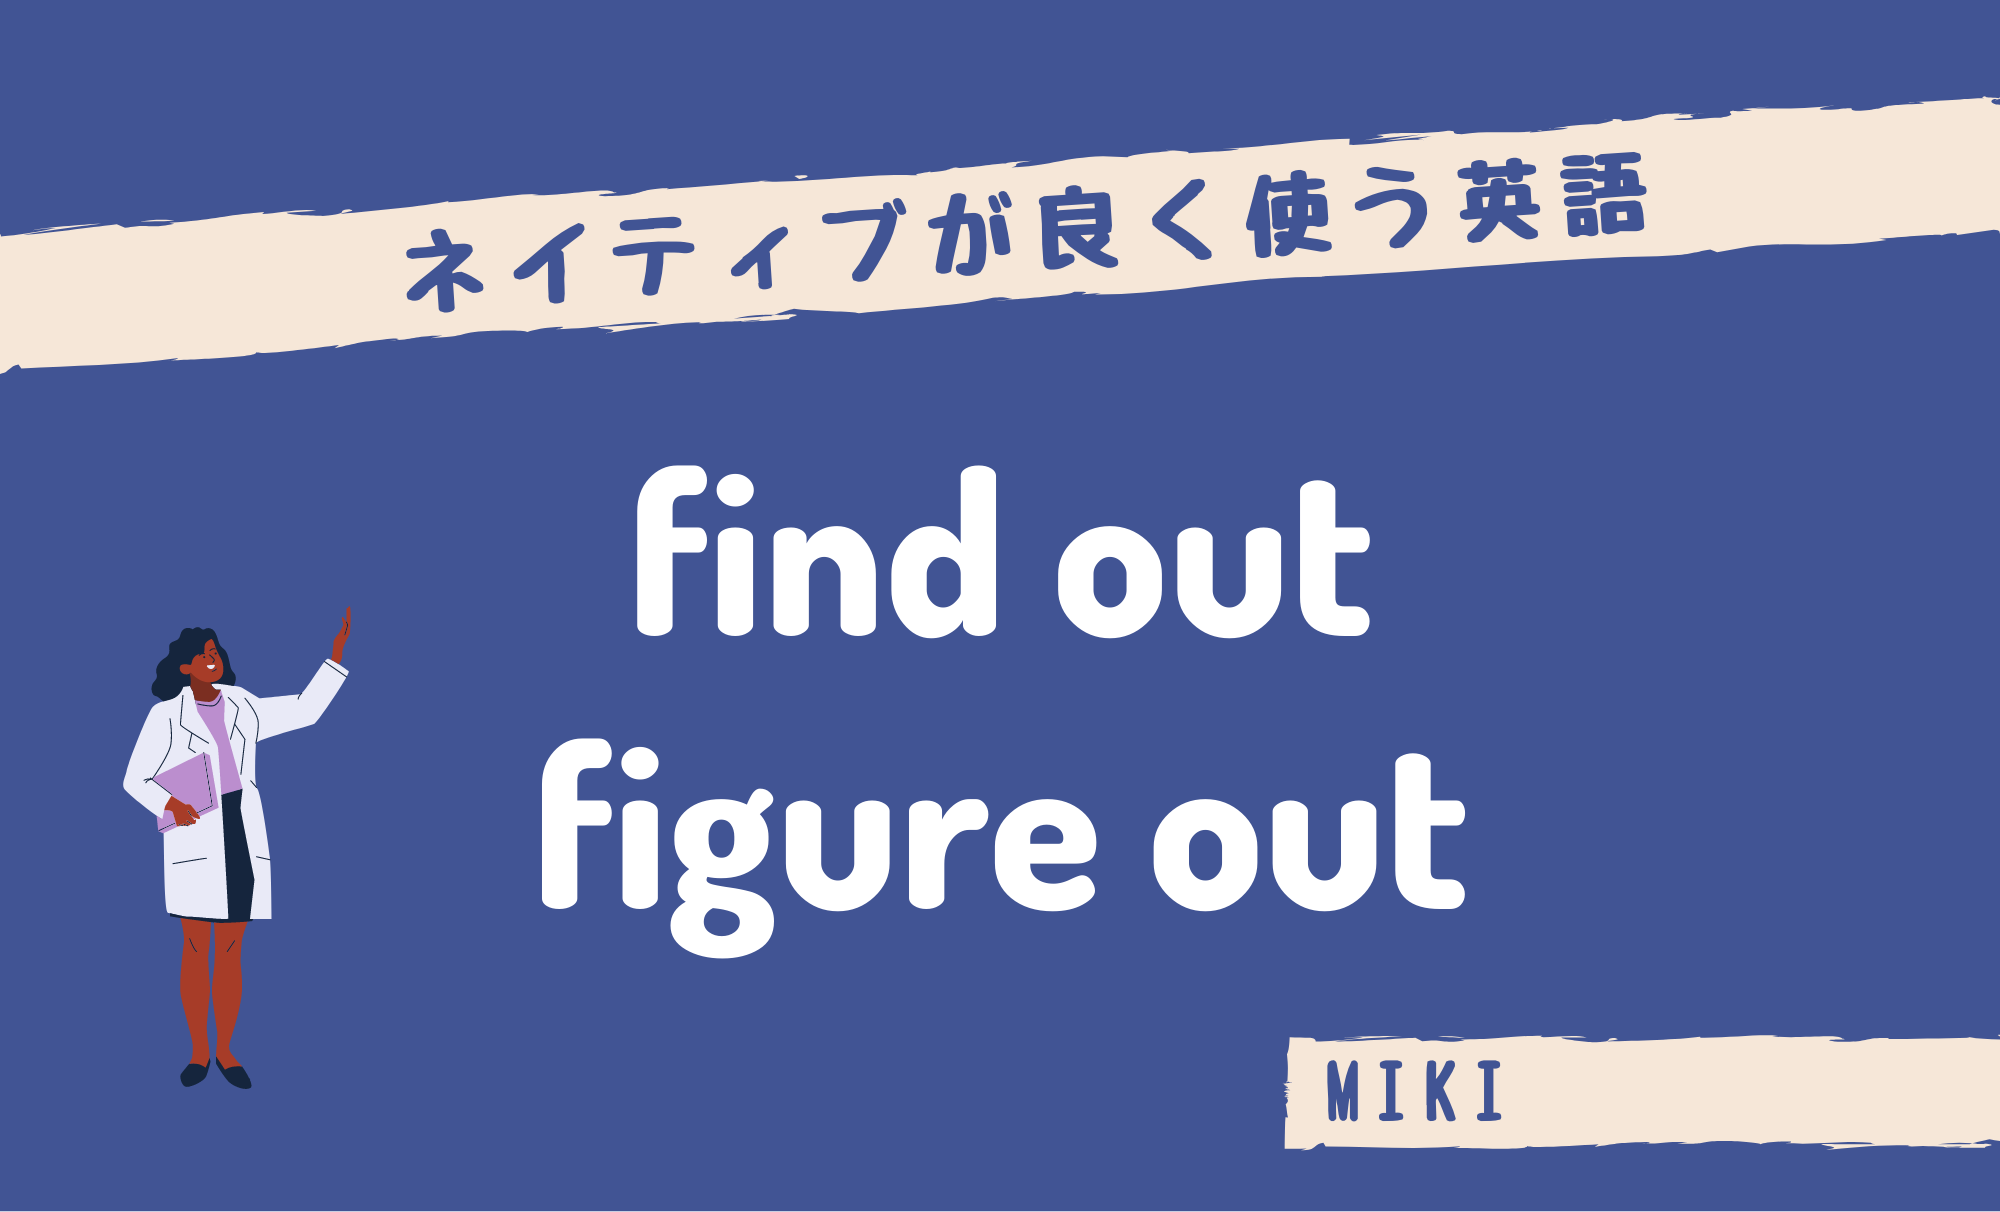 「find out」と「figure out」をネイティブのように使いこなそう！